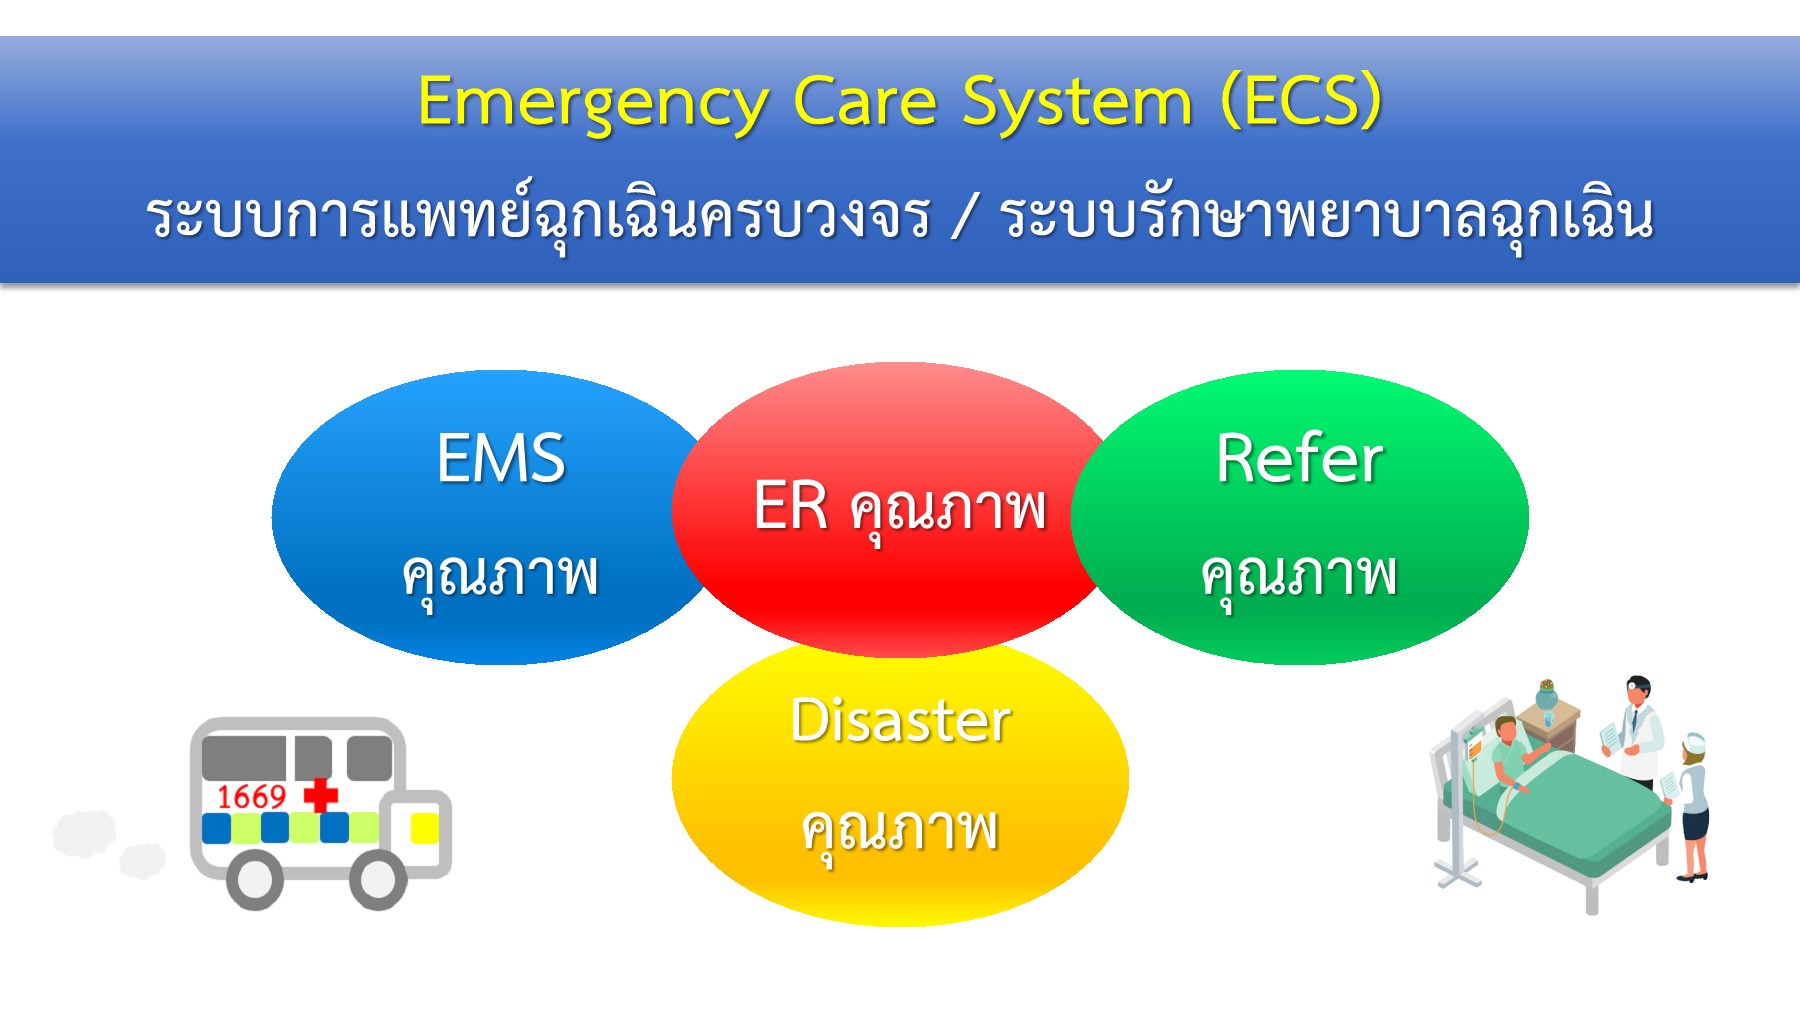 How to organize a working emergency care system